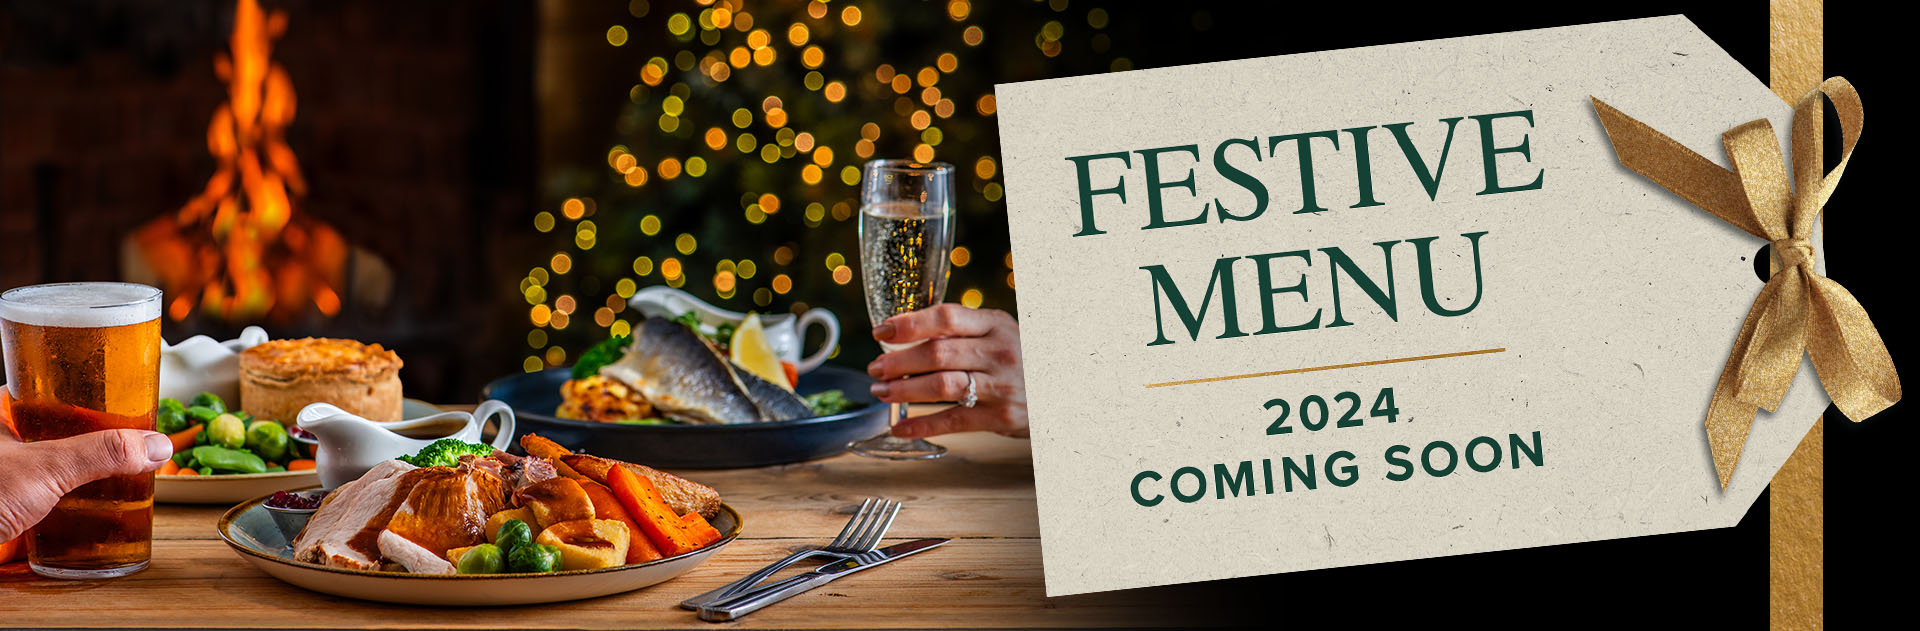 Festive Menu at Red Lion, Knowle 